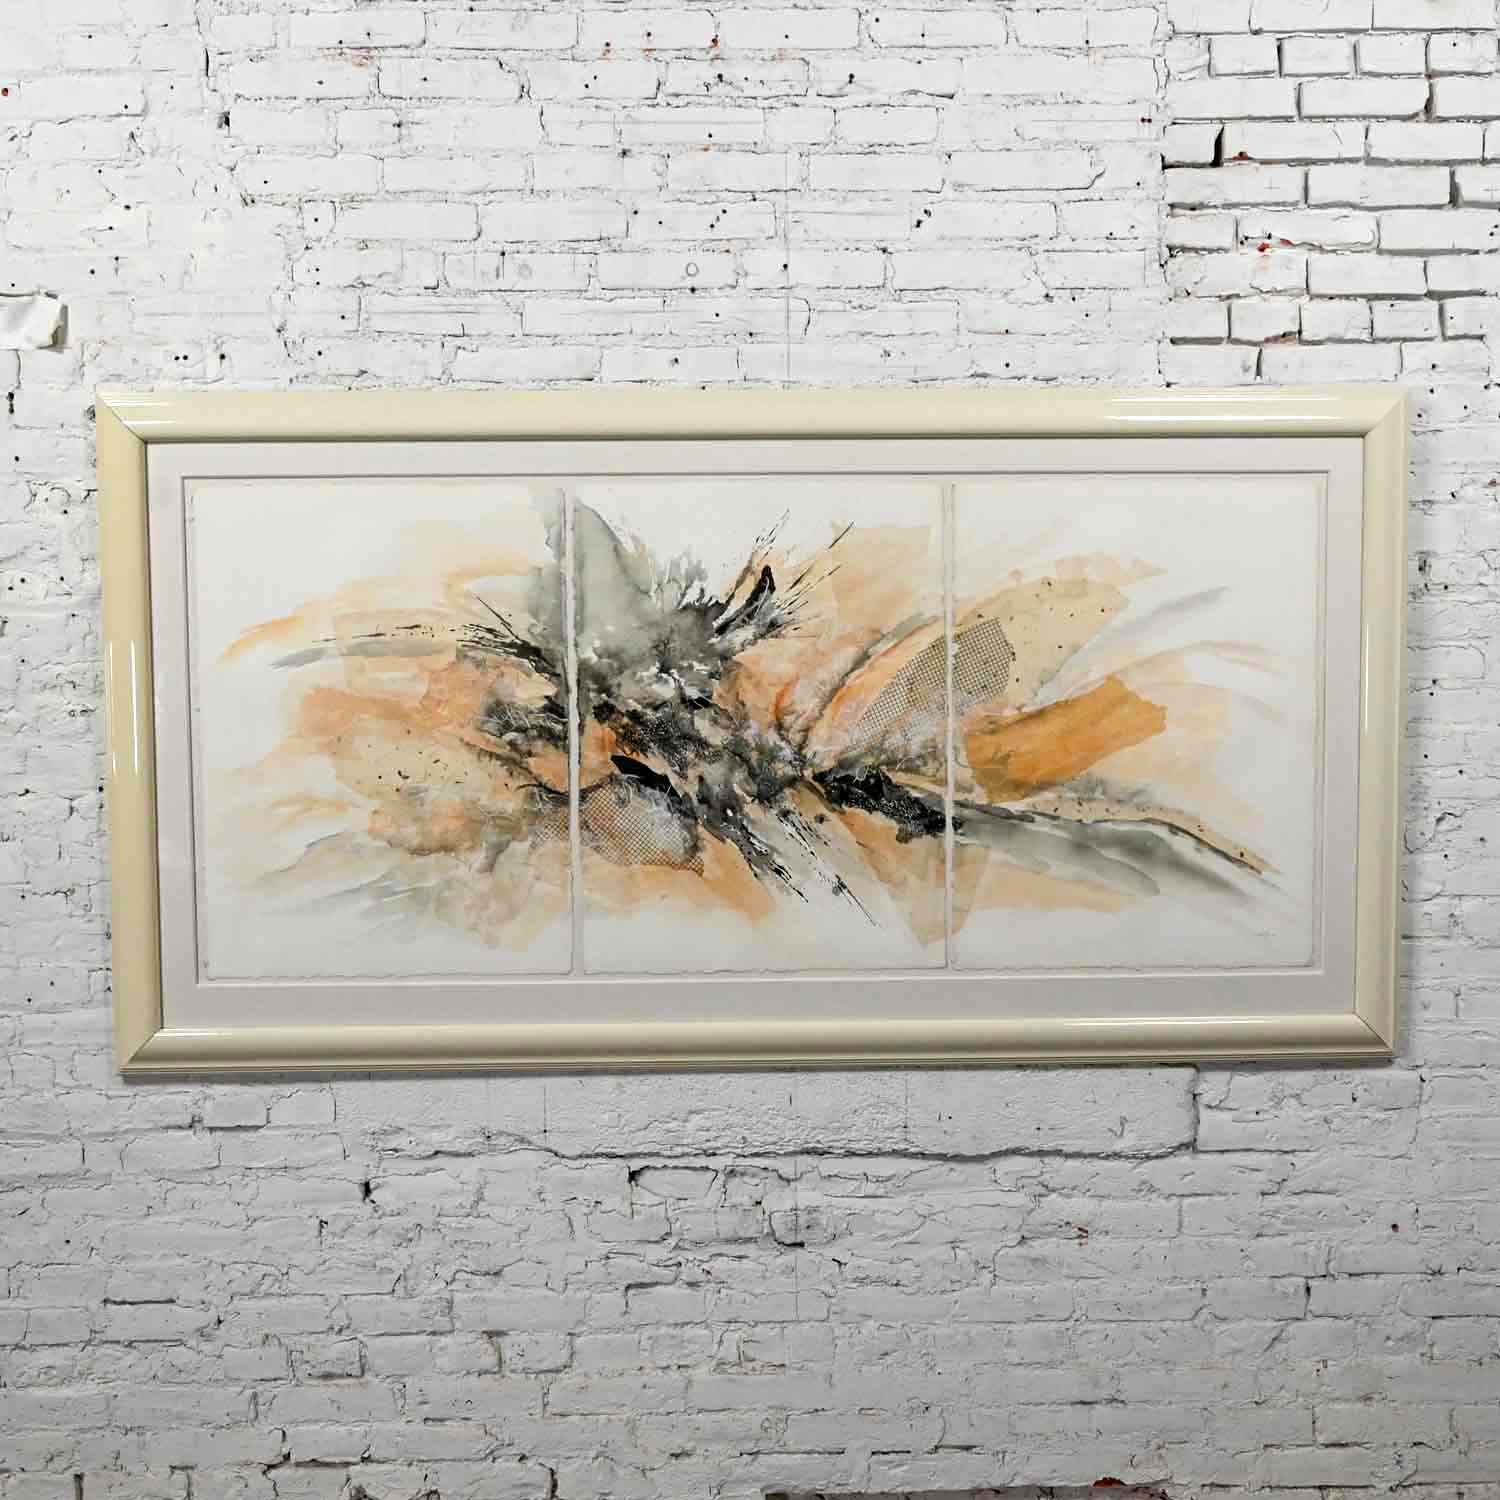 Gorgeous vintage large scale textured abstract mixed media triptych painting or wall art signed Koo. Beautiful condition, keeping in mind that this is vintage and not new so will have signs of use and wear. There is new paper and a hanger on the